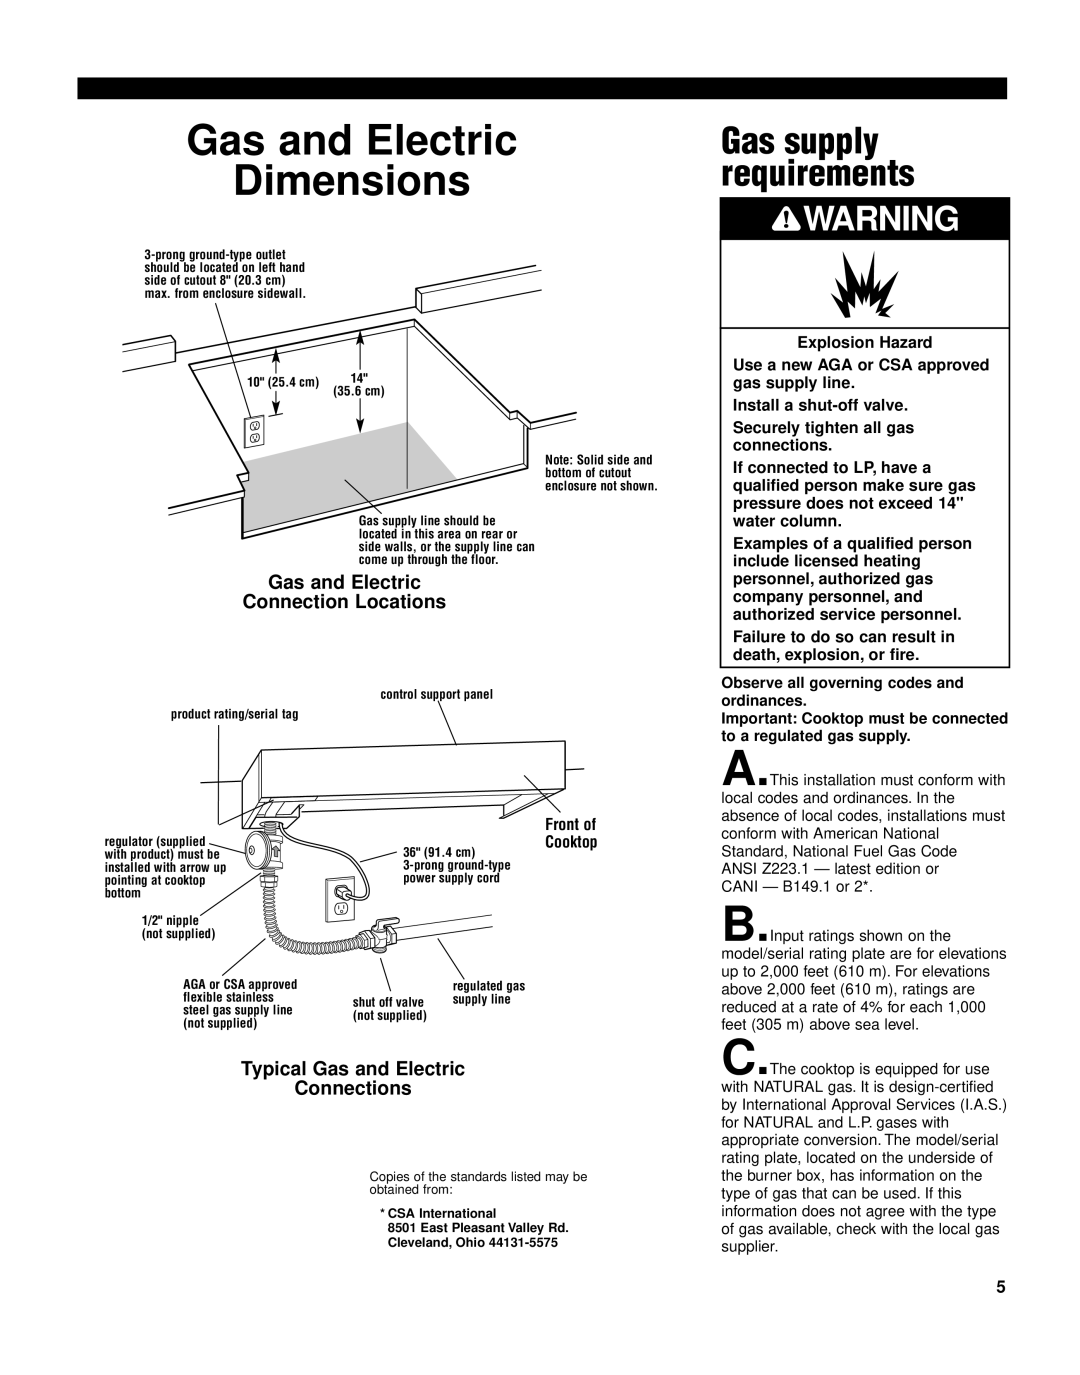 KitchenAid KGCP462K installation instructions Gas and Electric Dimensions, Gas supply requirements 